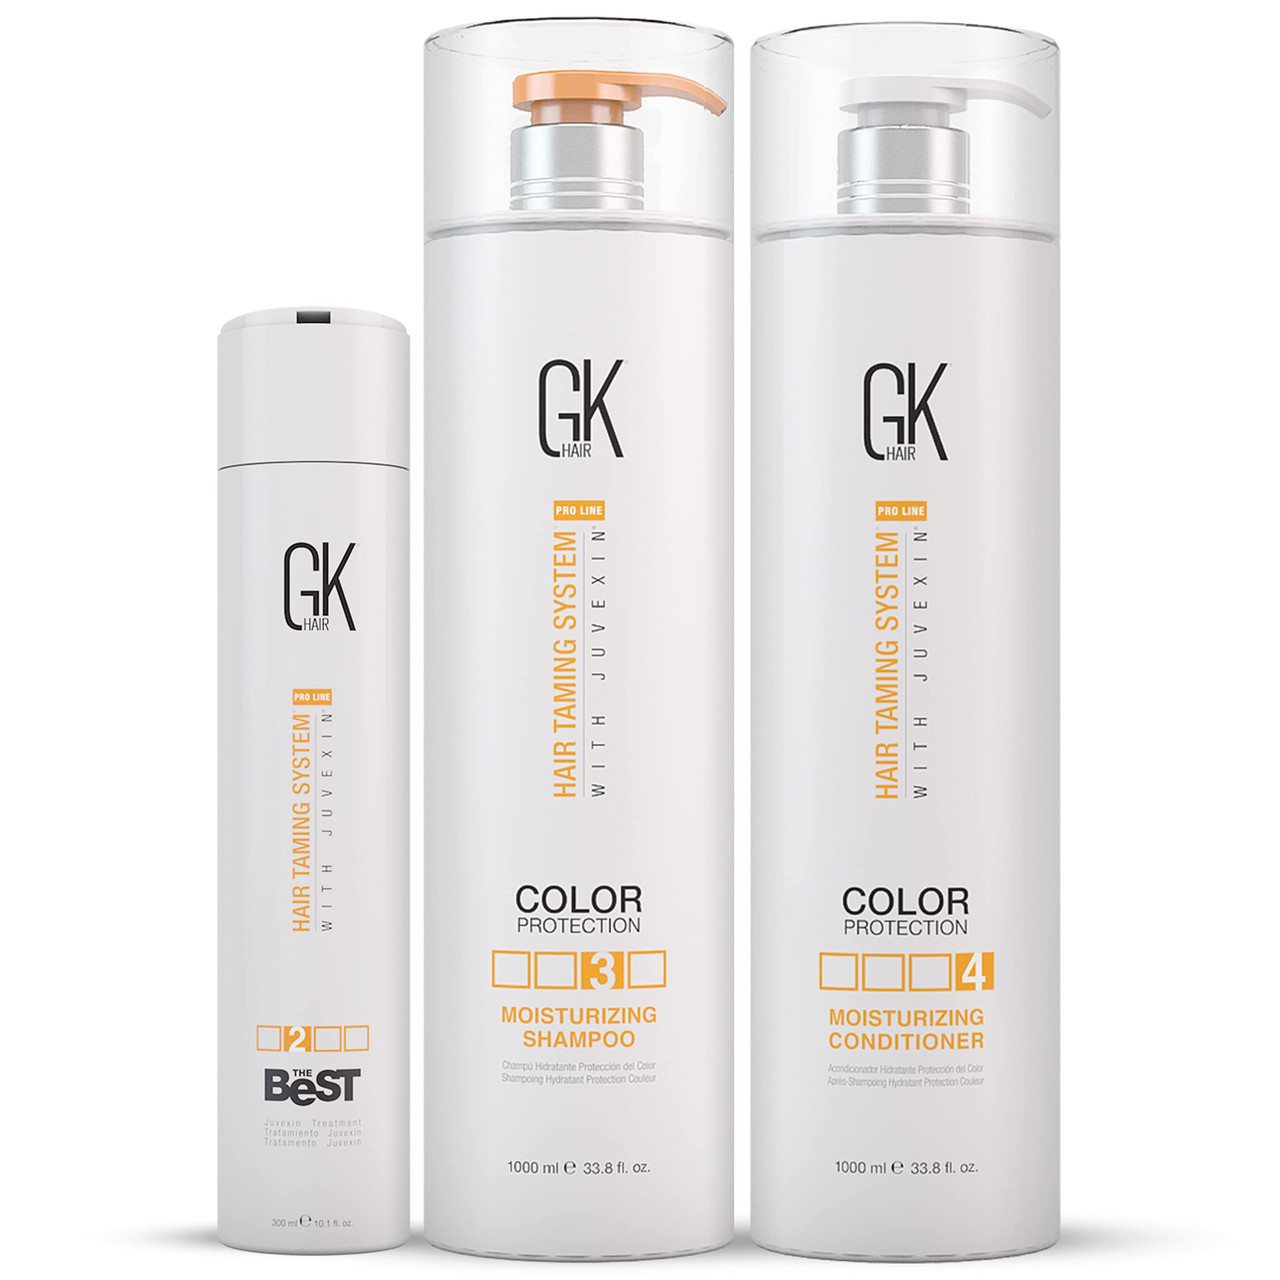 GK HAIR Global Keratin The Best Consumer Box Kit 101 Fl Oz300ml Smoothing  Keratin Treatment Professional Brazilian Complex Blowout Straightening For  Silky Smooth  Frizzy Hair  Formaldehyde Free Consumer Box Kit 101